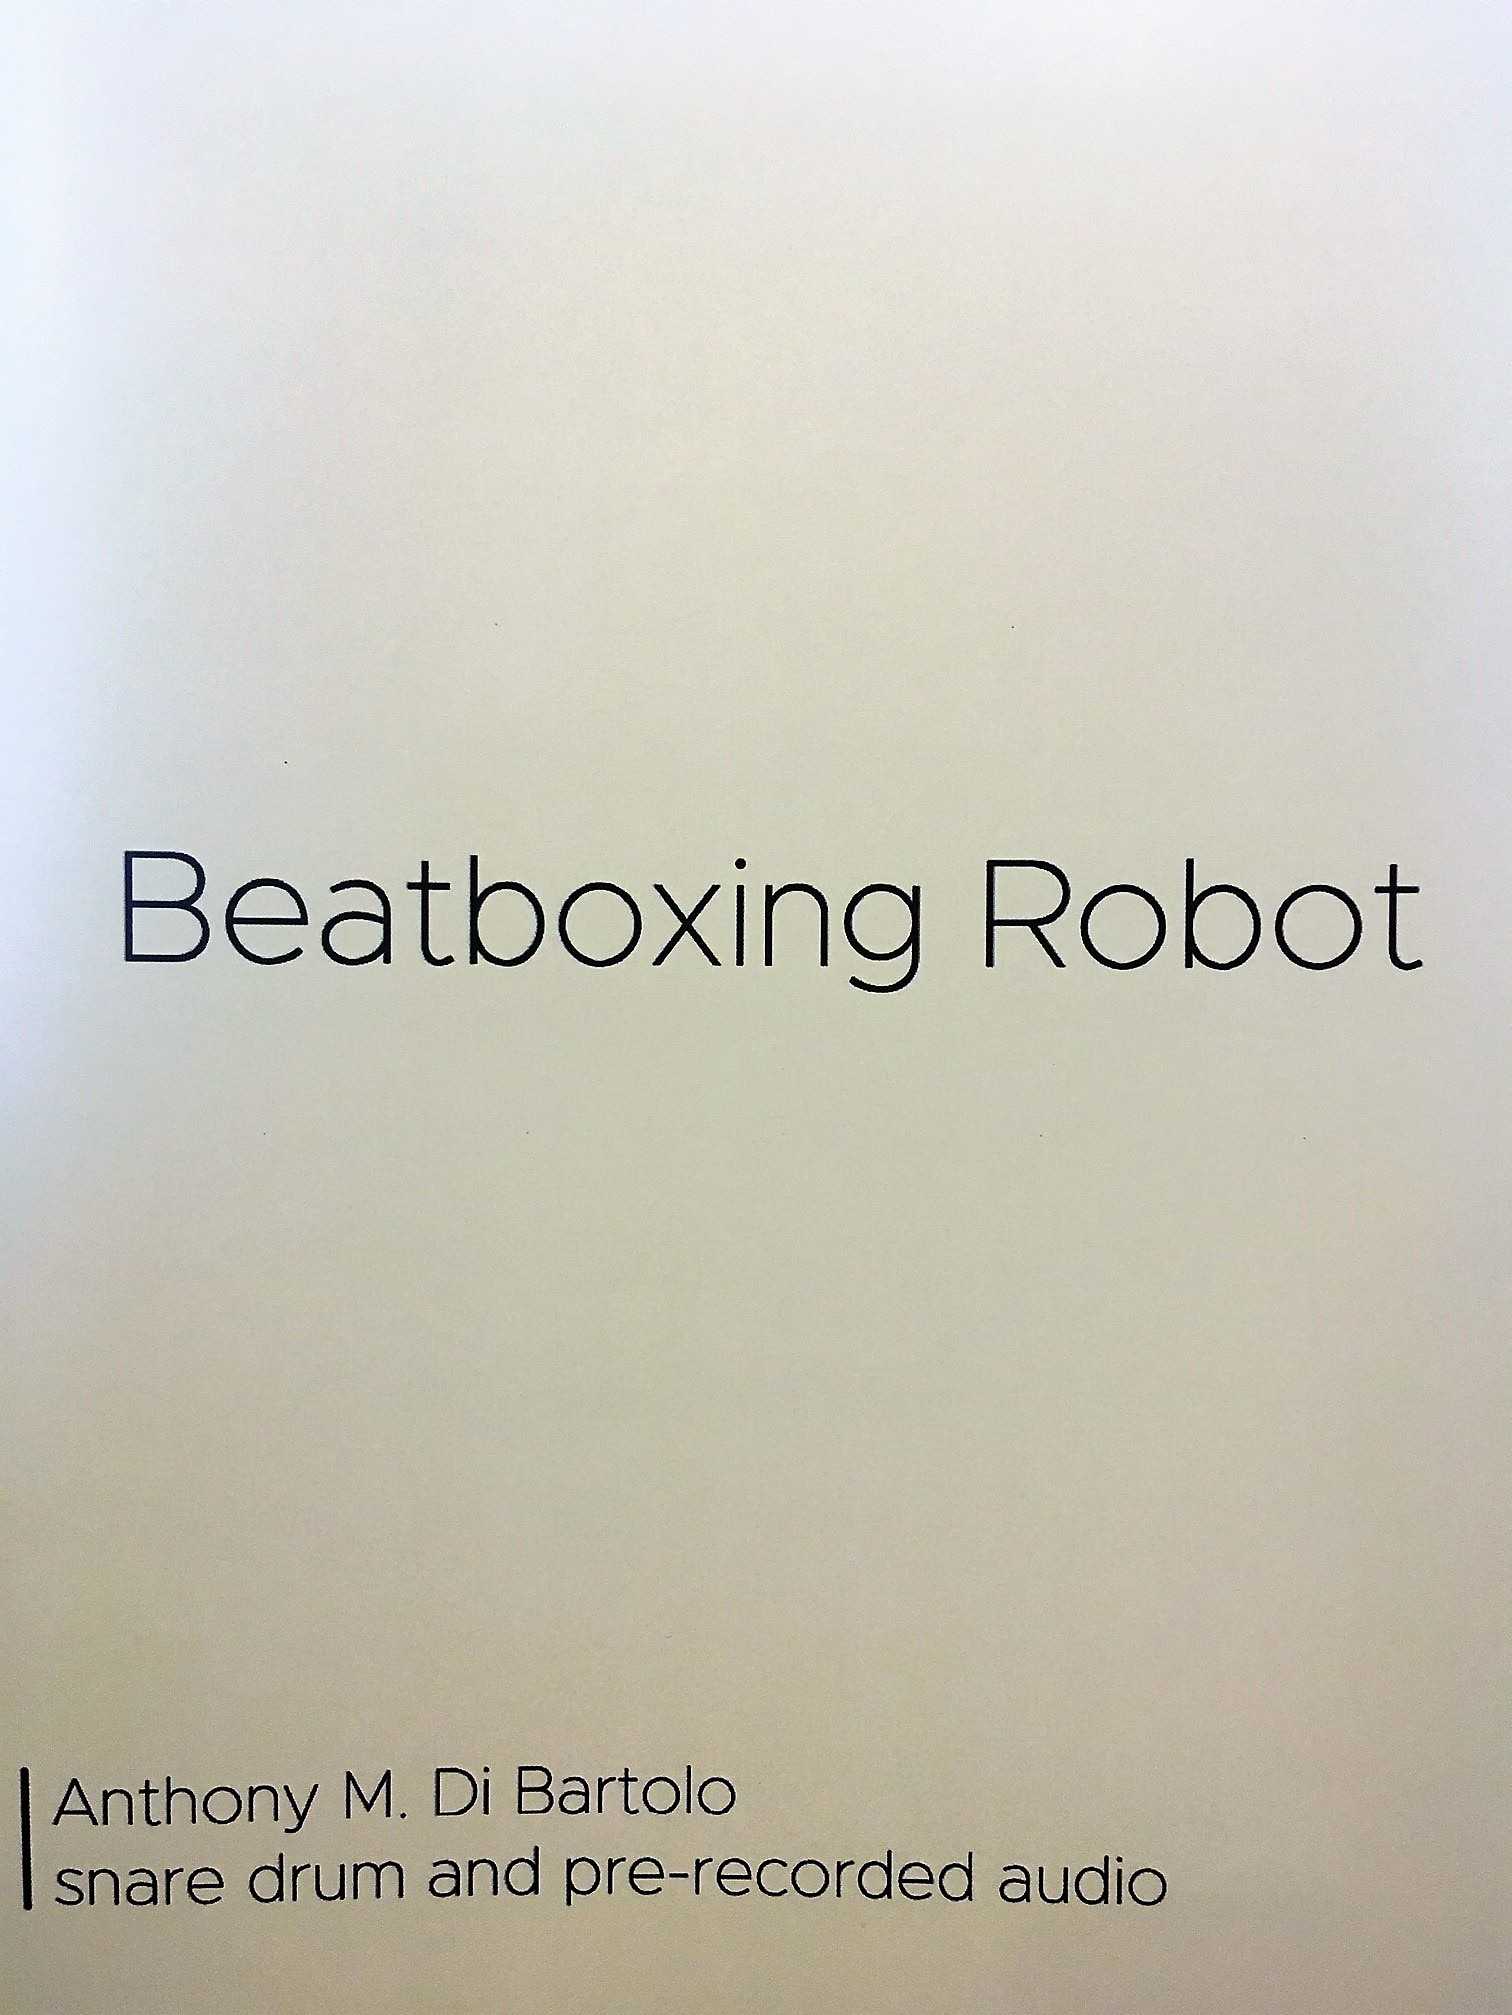 Beatboxing Robot by Anthony Bartolo